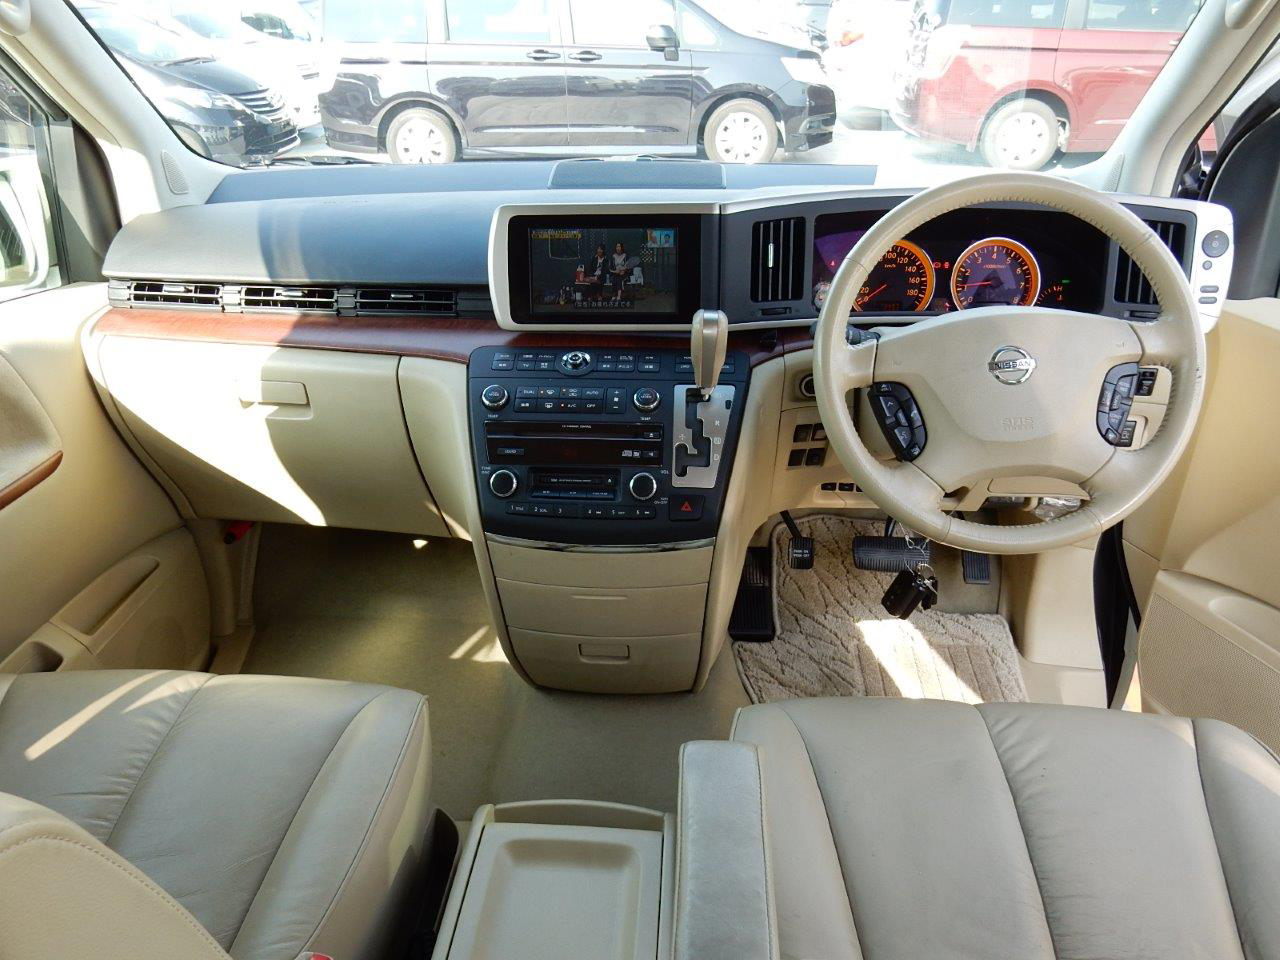 How do you feel about a beige interior? Andrew's Japanese Cars